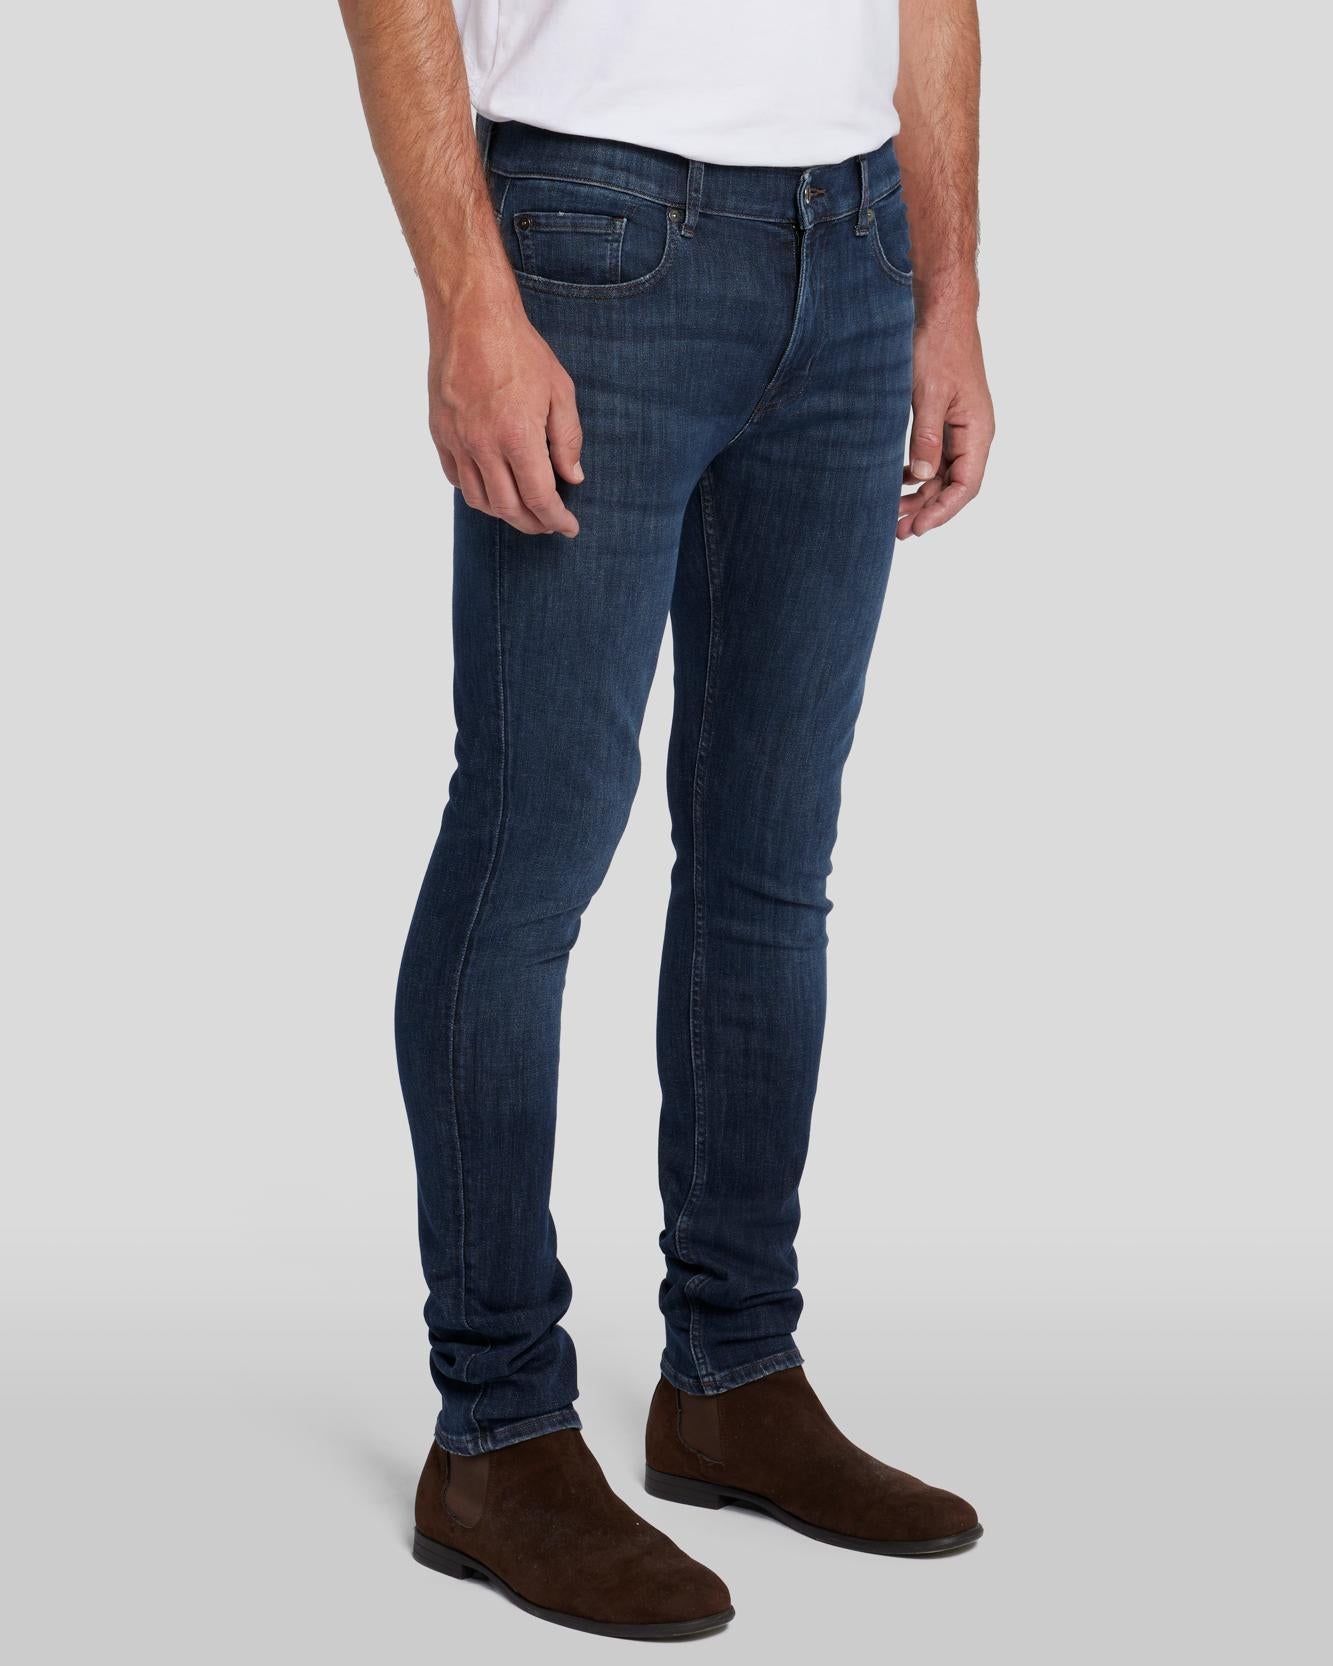 DG Premium Brands dba 7 For All Mankind and Splendid: Read reviews and ask  questions